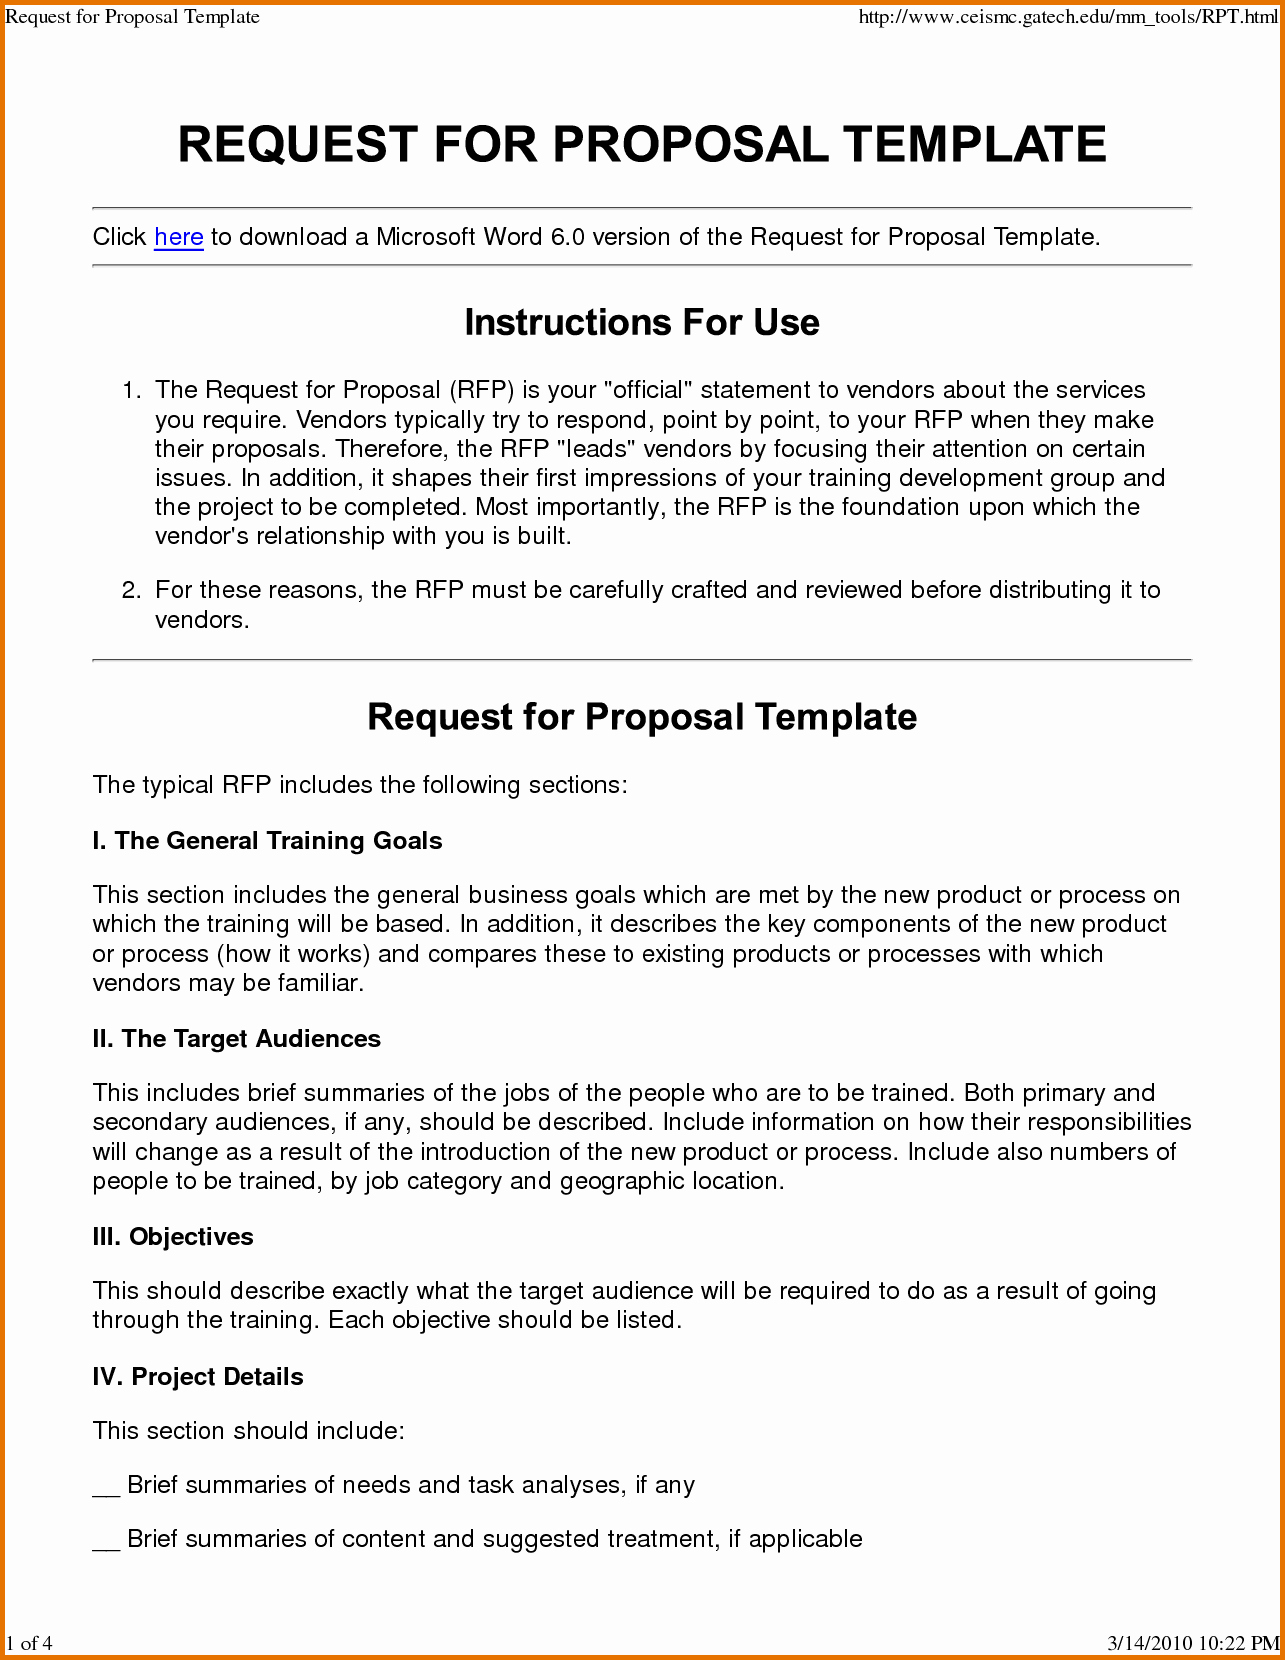 Simple Rfp Template Word Lovely Request for Proposal Template Wordreference Letters Words